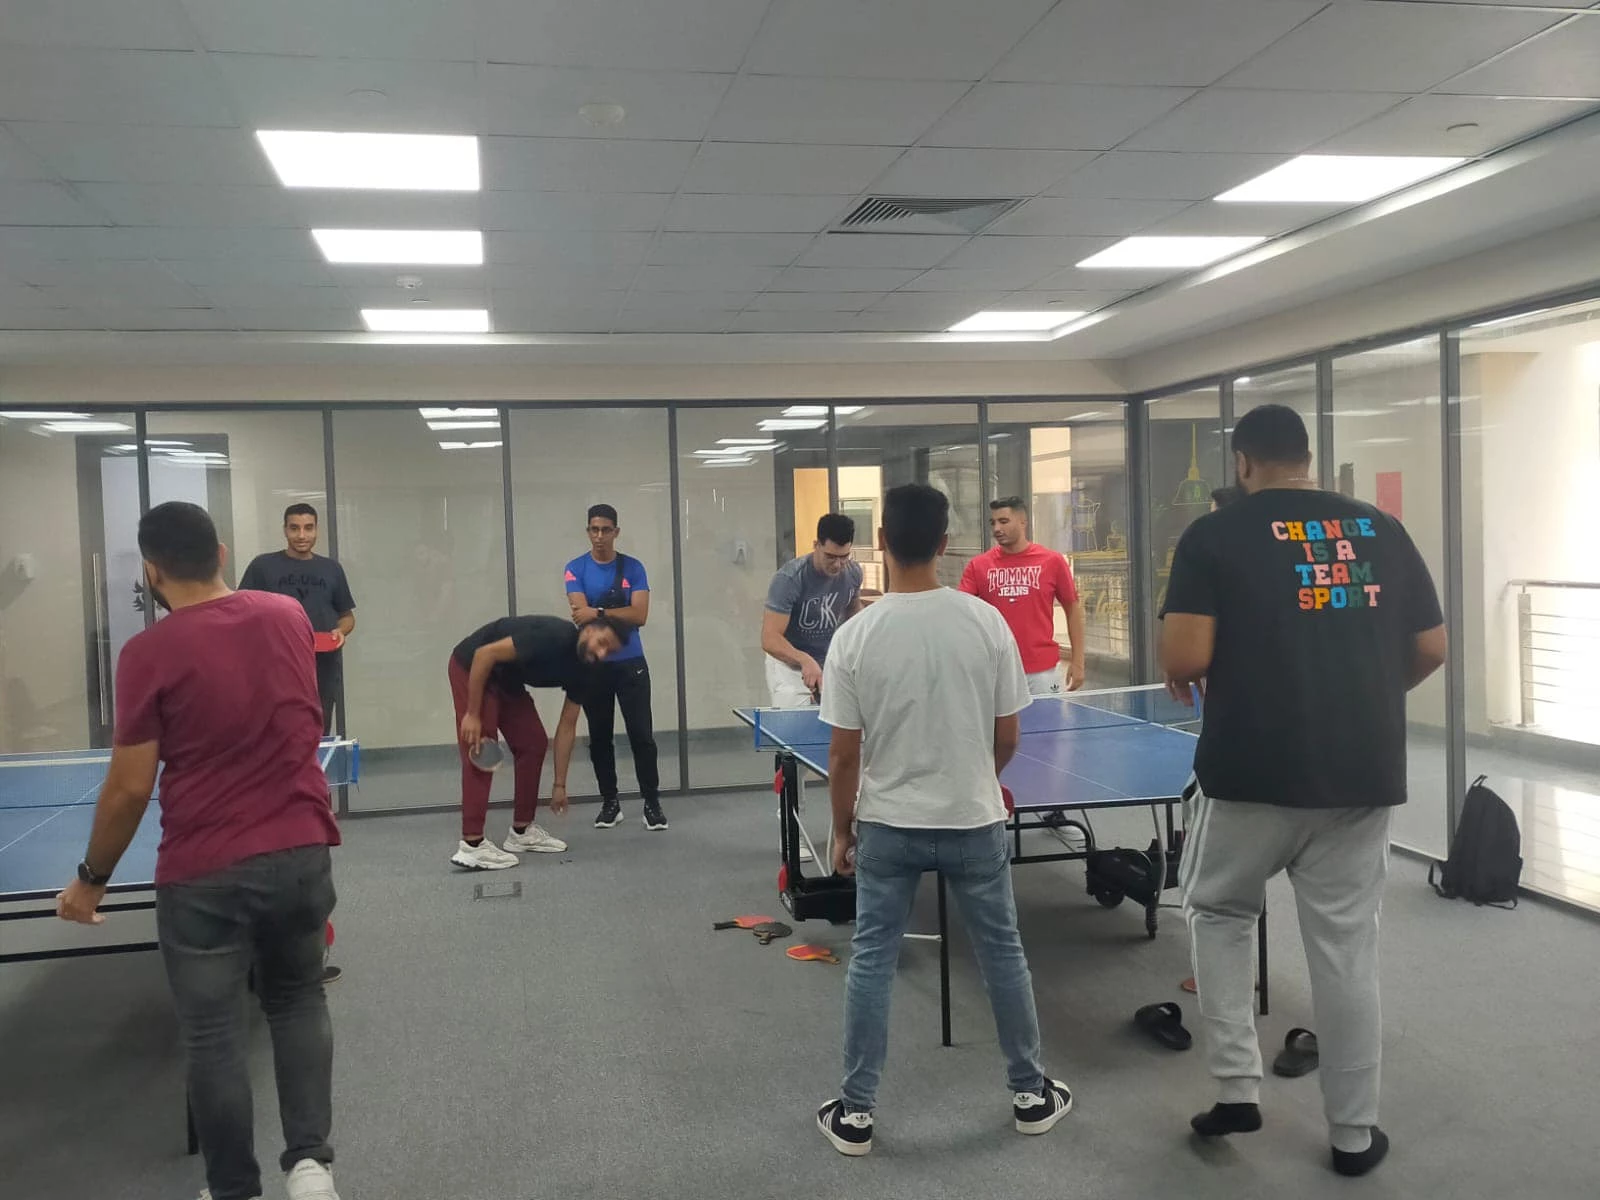 Free sports activities for branch students in their free time3